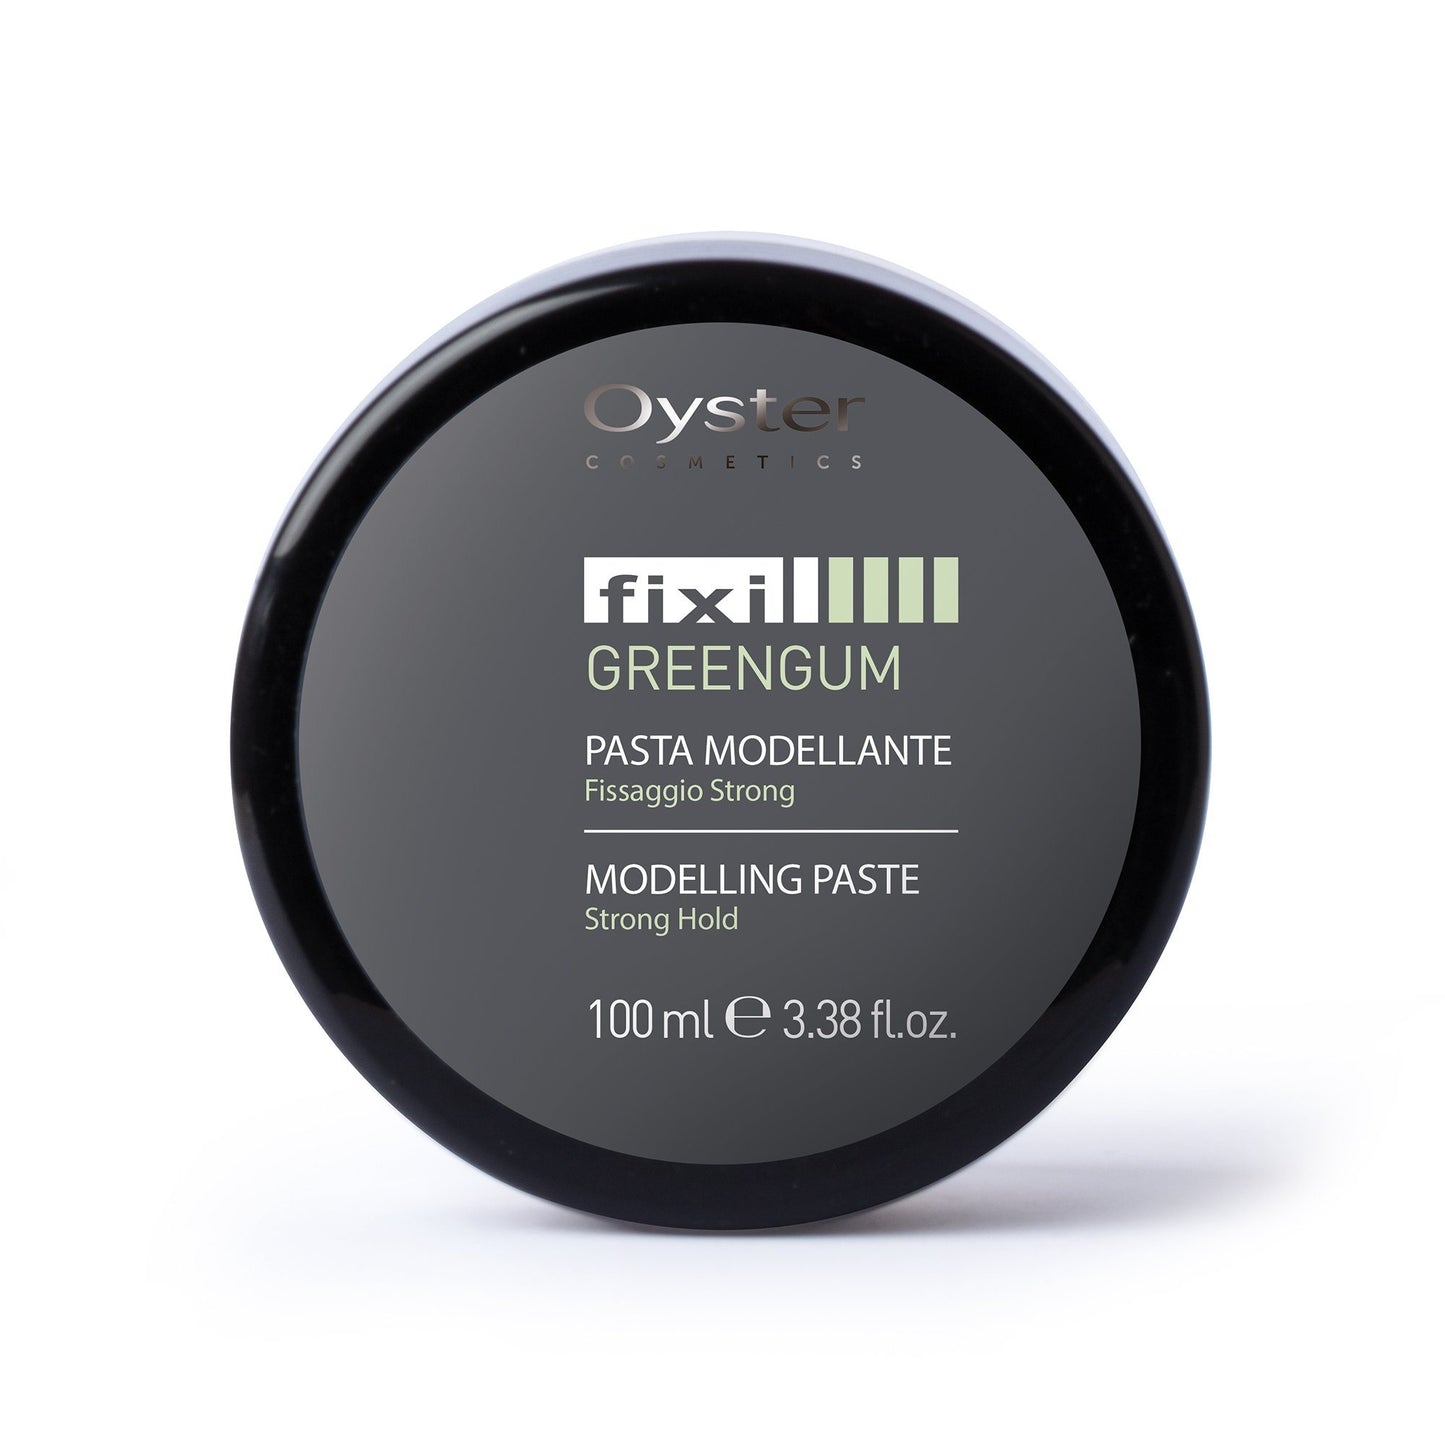 GREENGUM | Modelling Paste | Strong hold | WAX - CERA | FIXI HAIR STYLING PRODUCTS OYSTER 